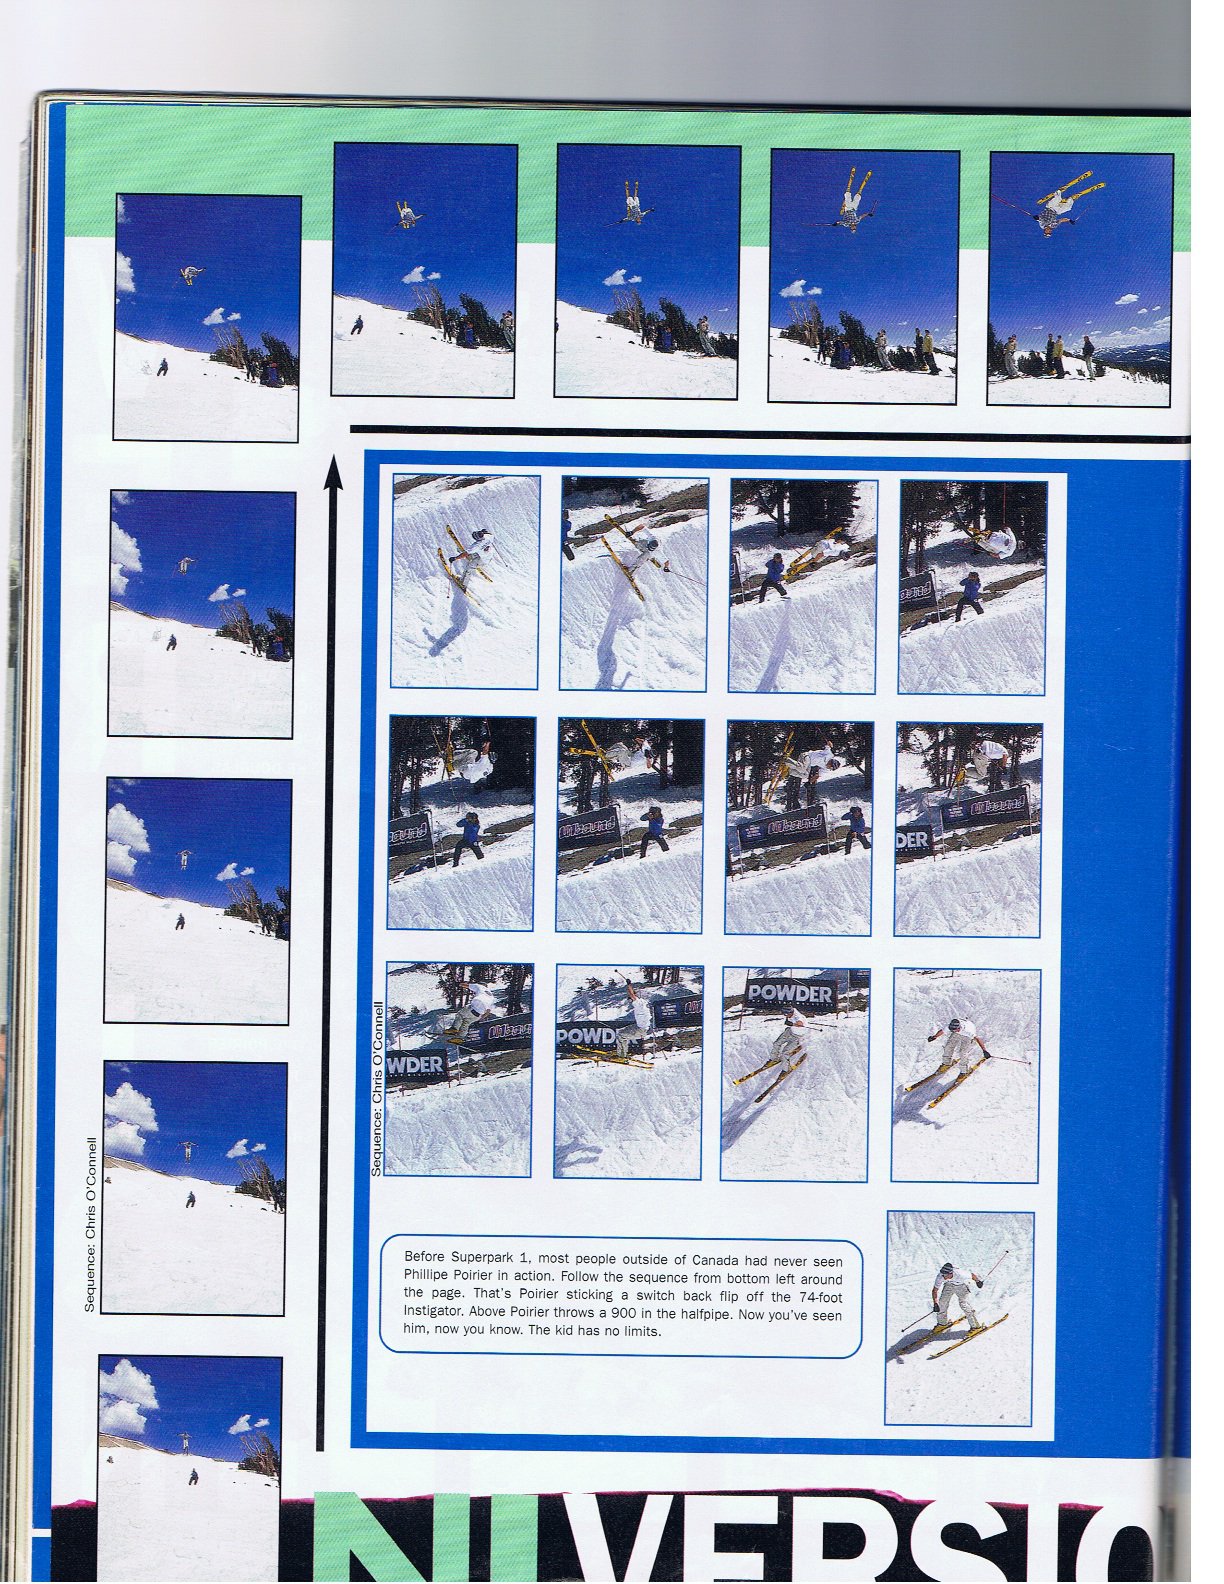 Superpark 1 article - page 5